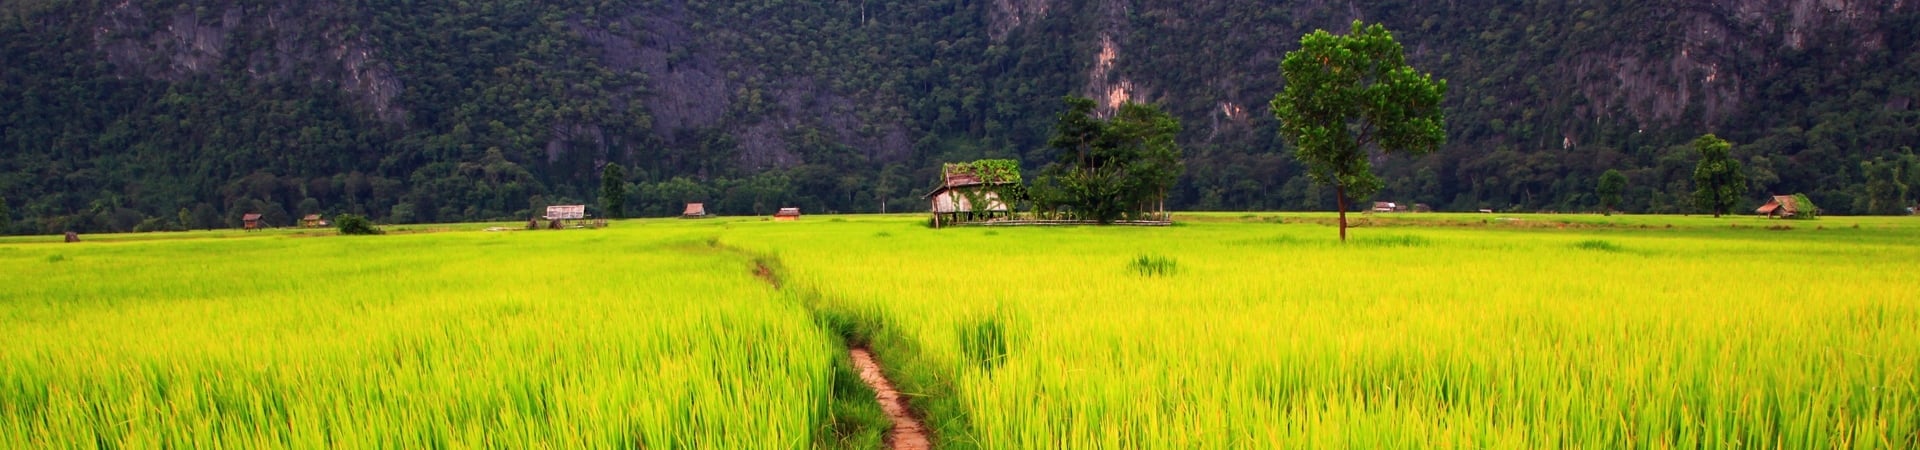 Image of Overland Laos